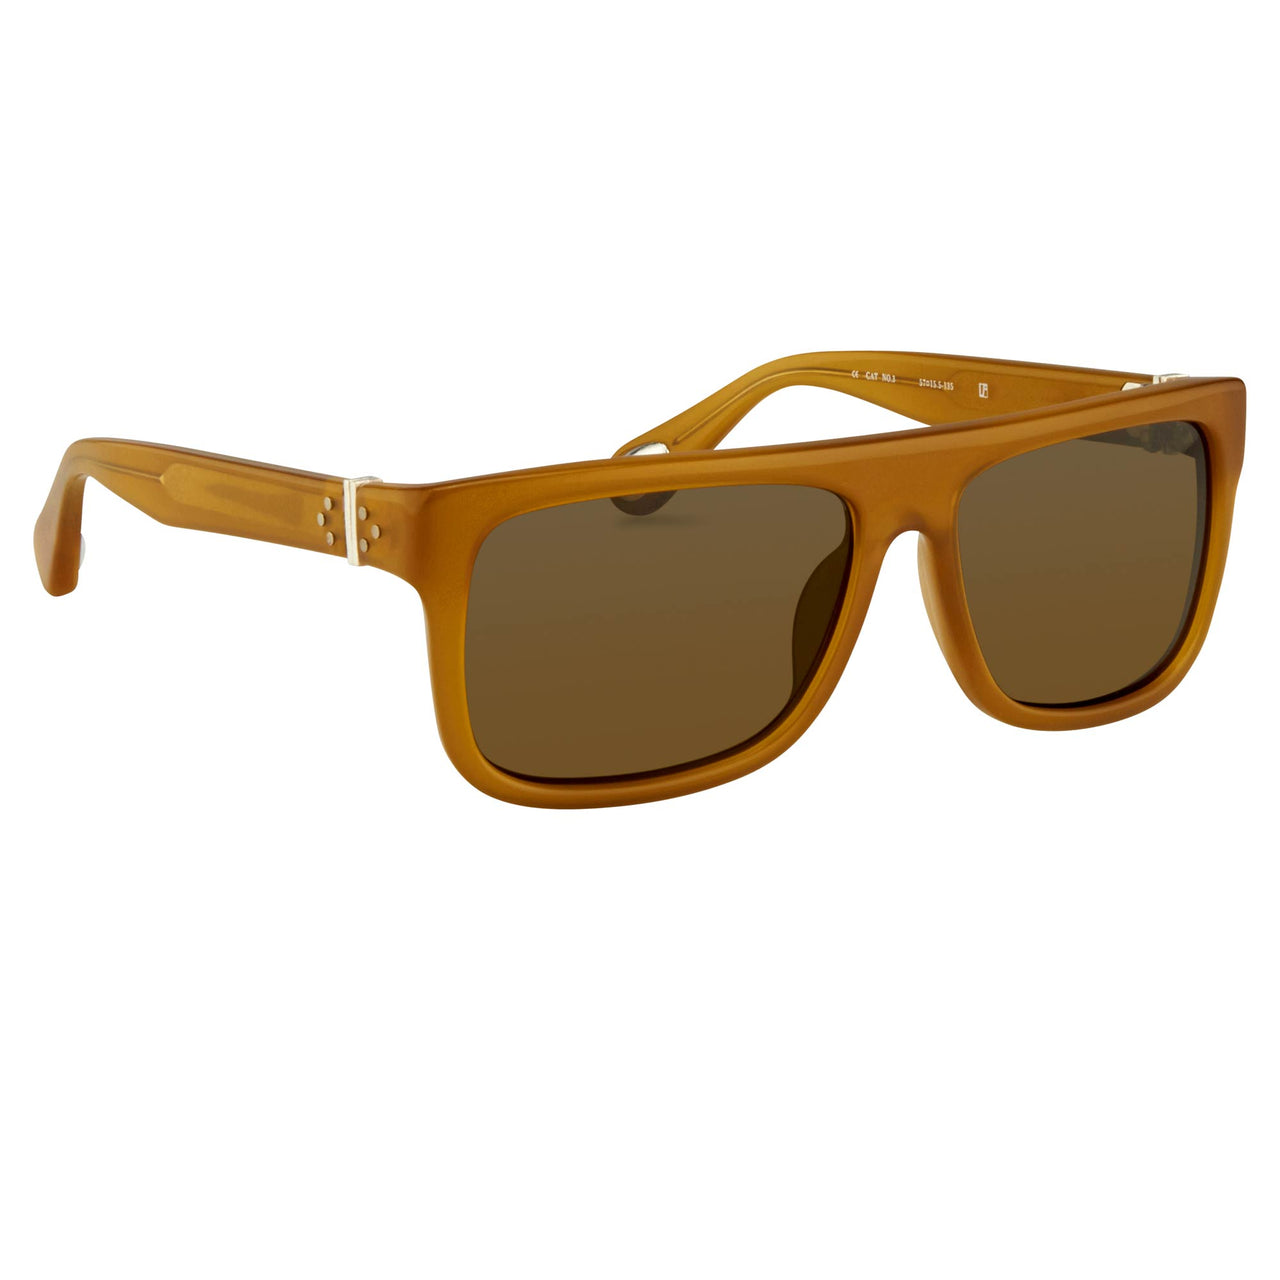 Ann Demeulemeester Sunglasses Flat Top Honey Orange 925 Silver with Green Lenses CAT 3 AD2C5SUN - Watches & Crystals